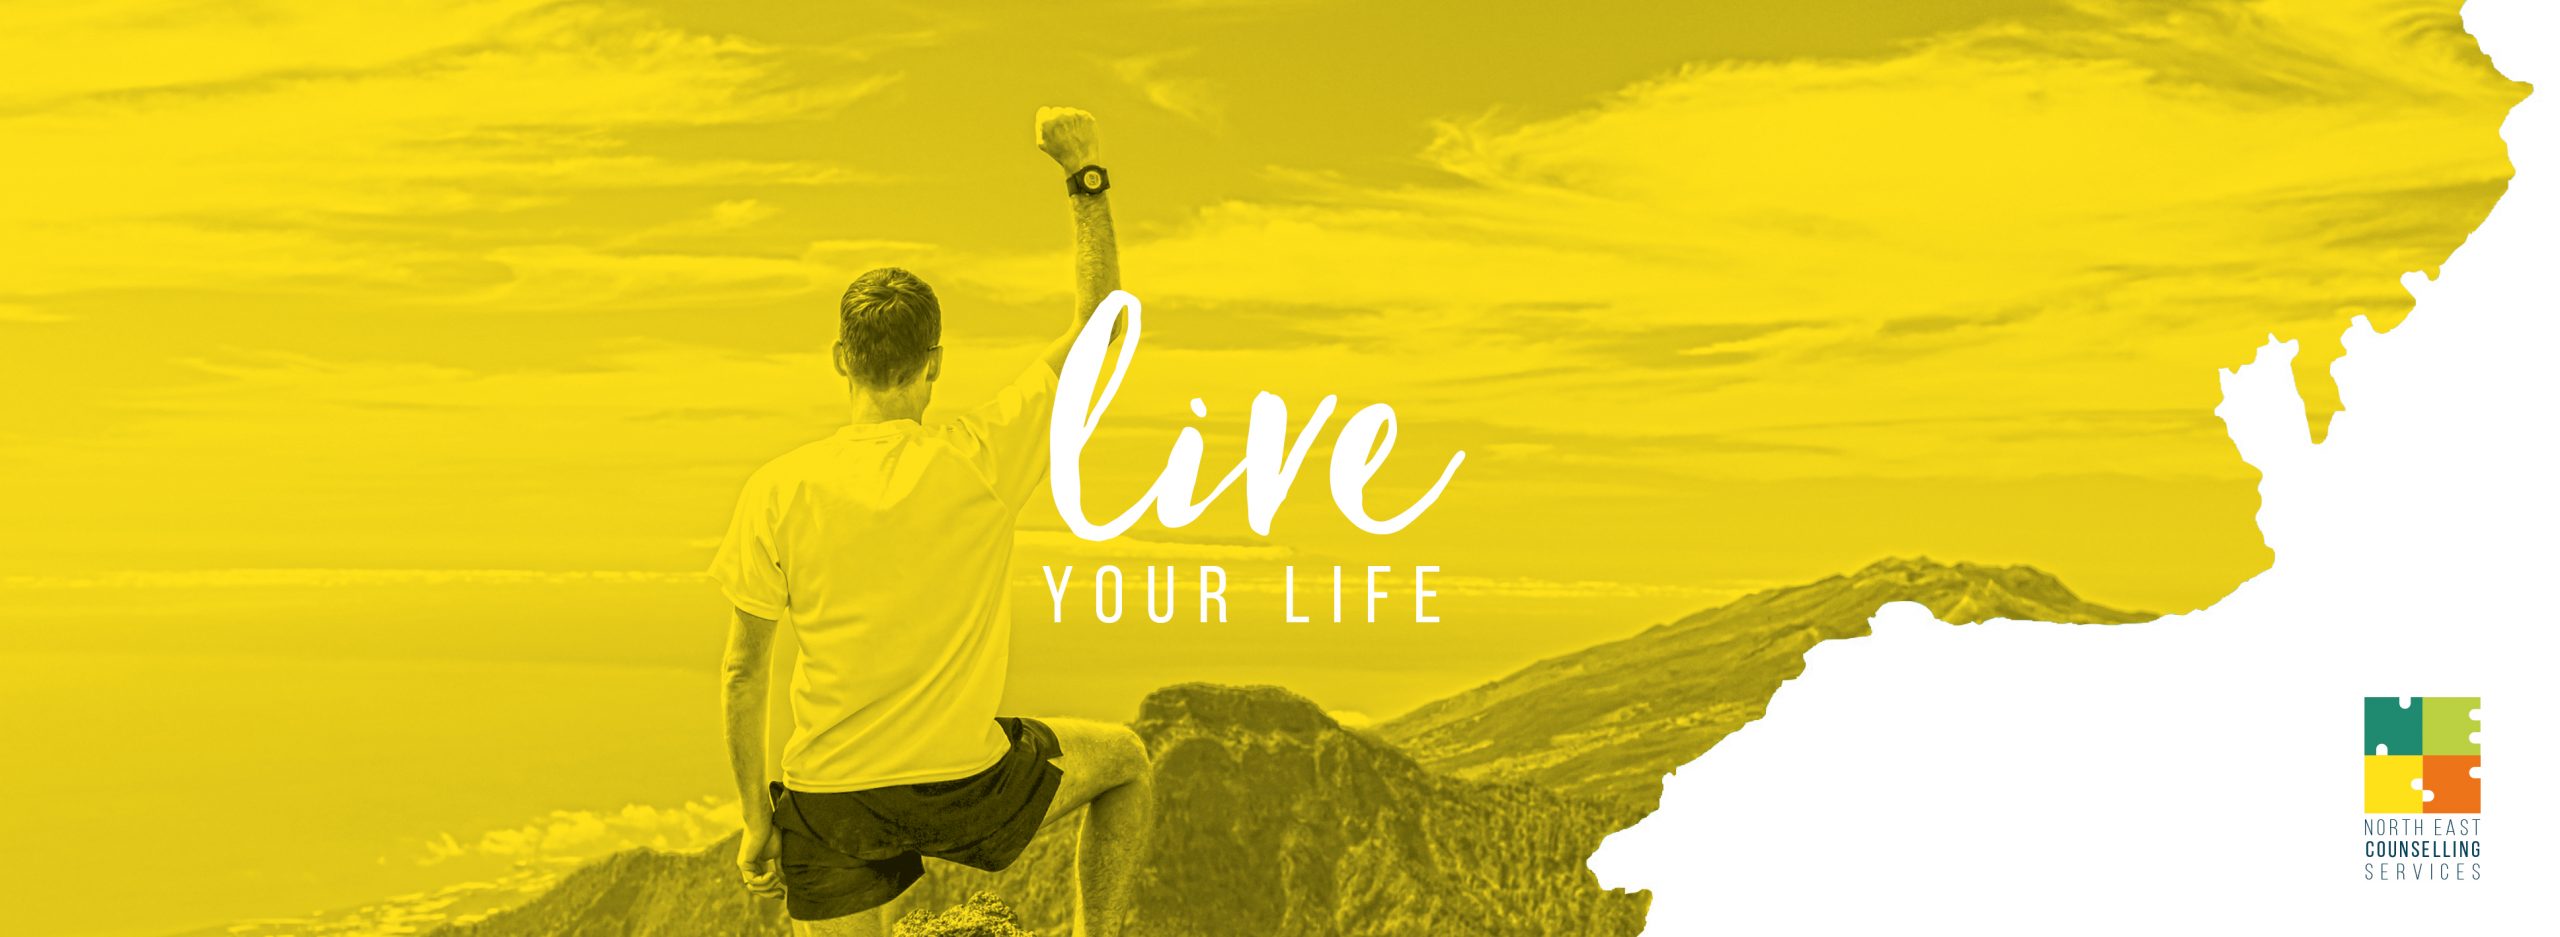 NECS-live-your-life-Banners02